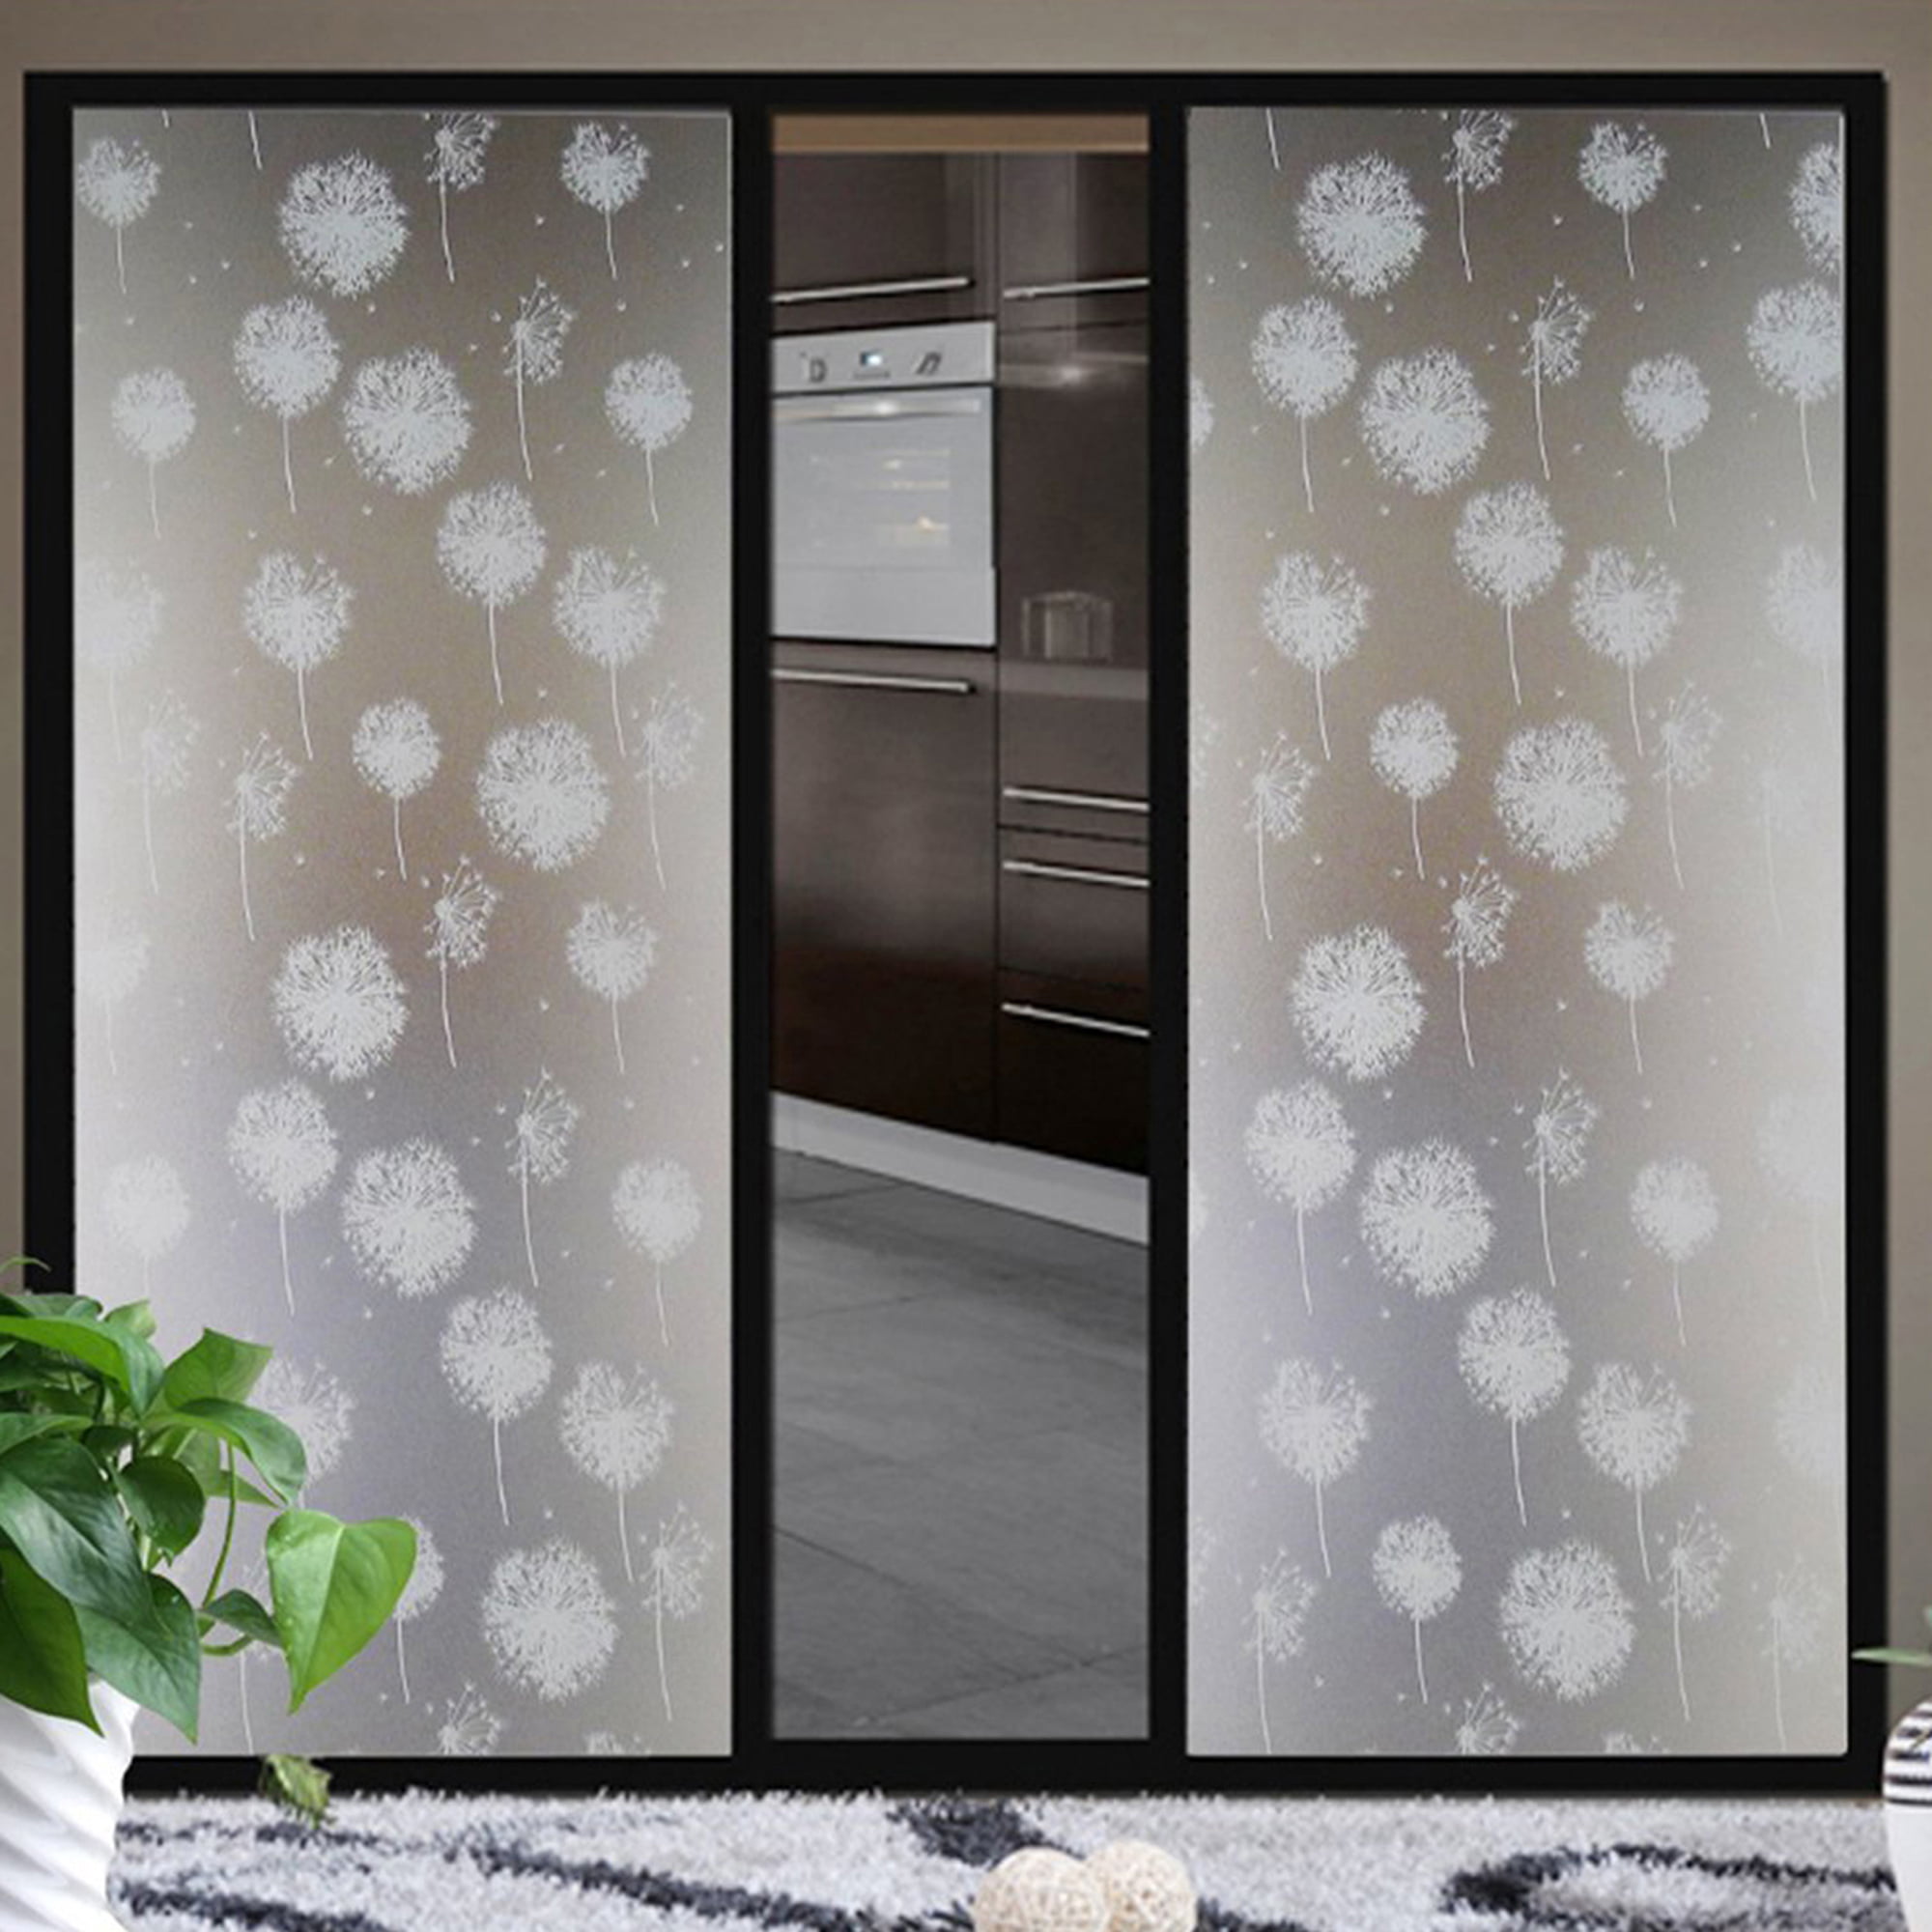 Waterproof Glass Frosted Home Bathroom window Privacy Self Adhesive Film Sticker 